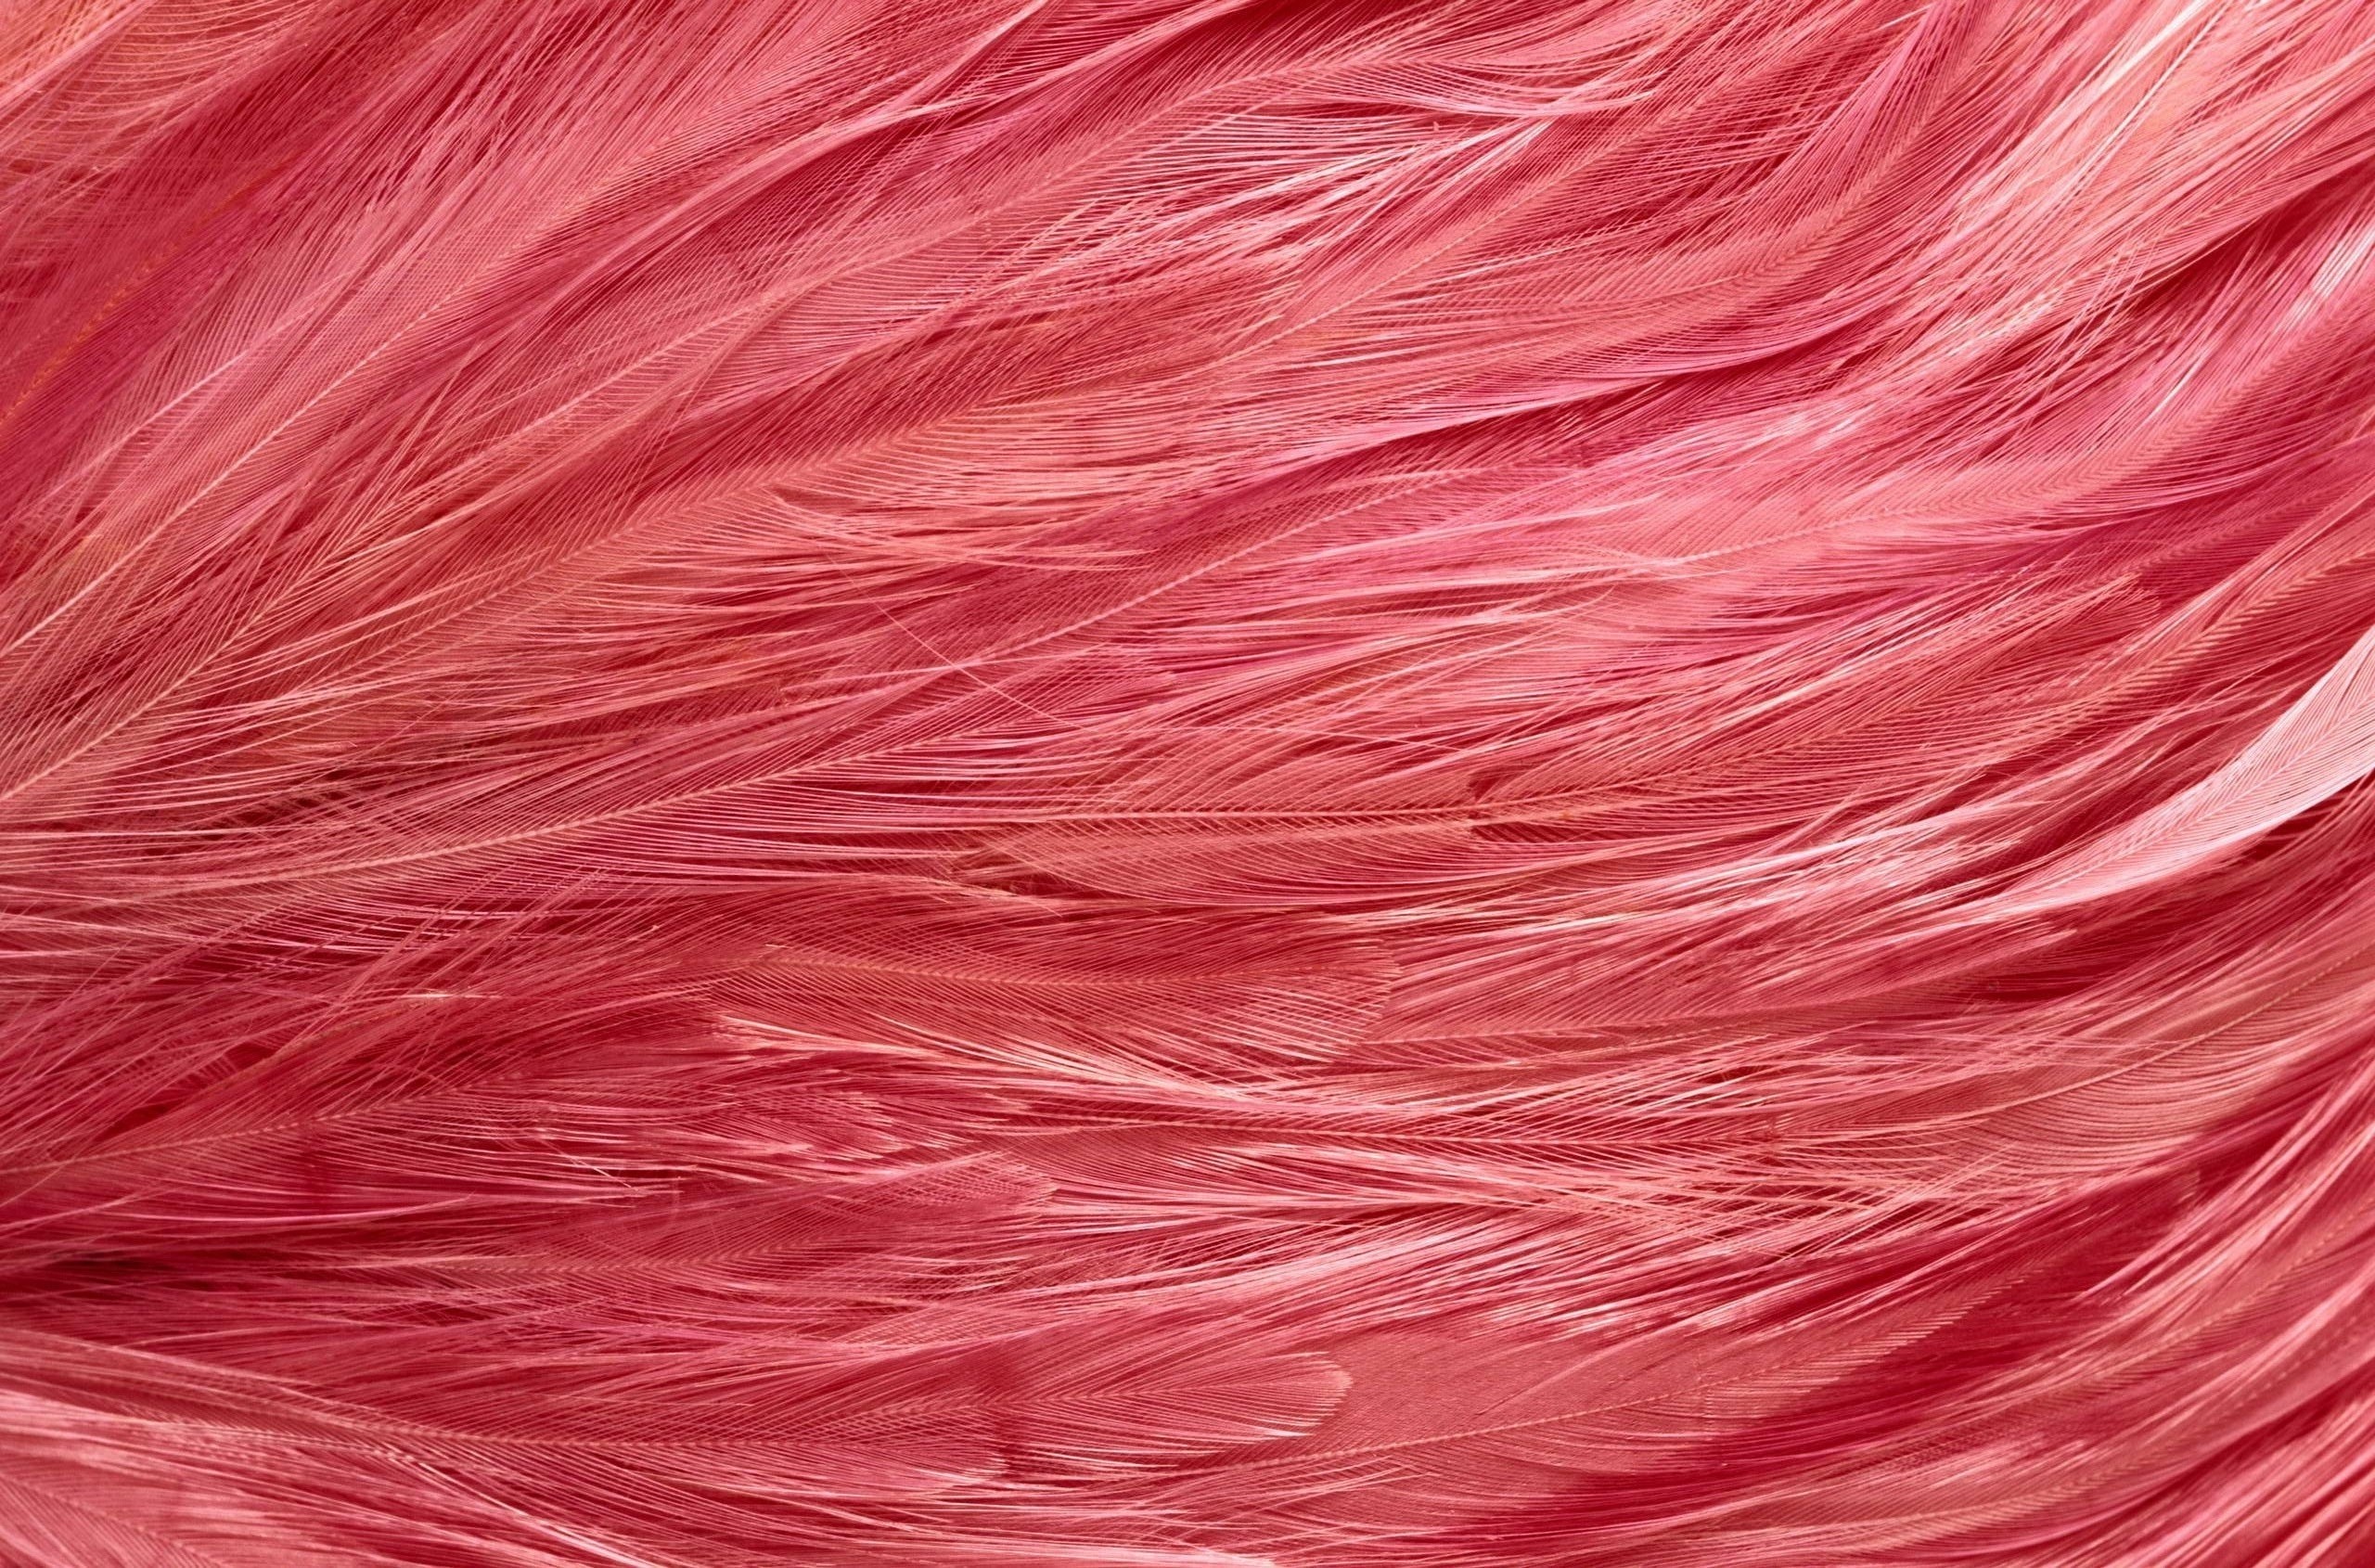 Faux Fur Tail 10 Steps With Pictures Instructablescom - Background Pink Feathers - HD Wallpaper 